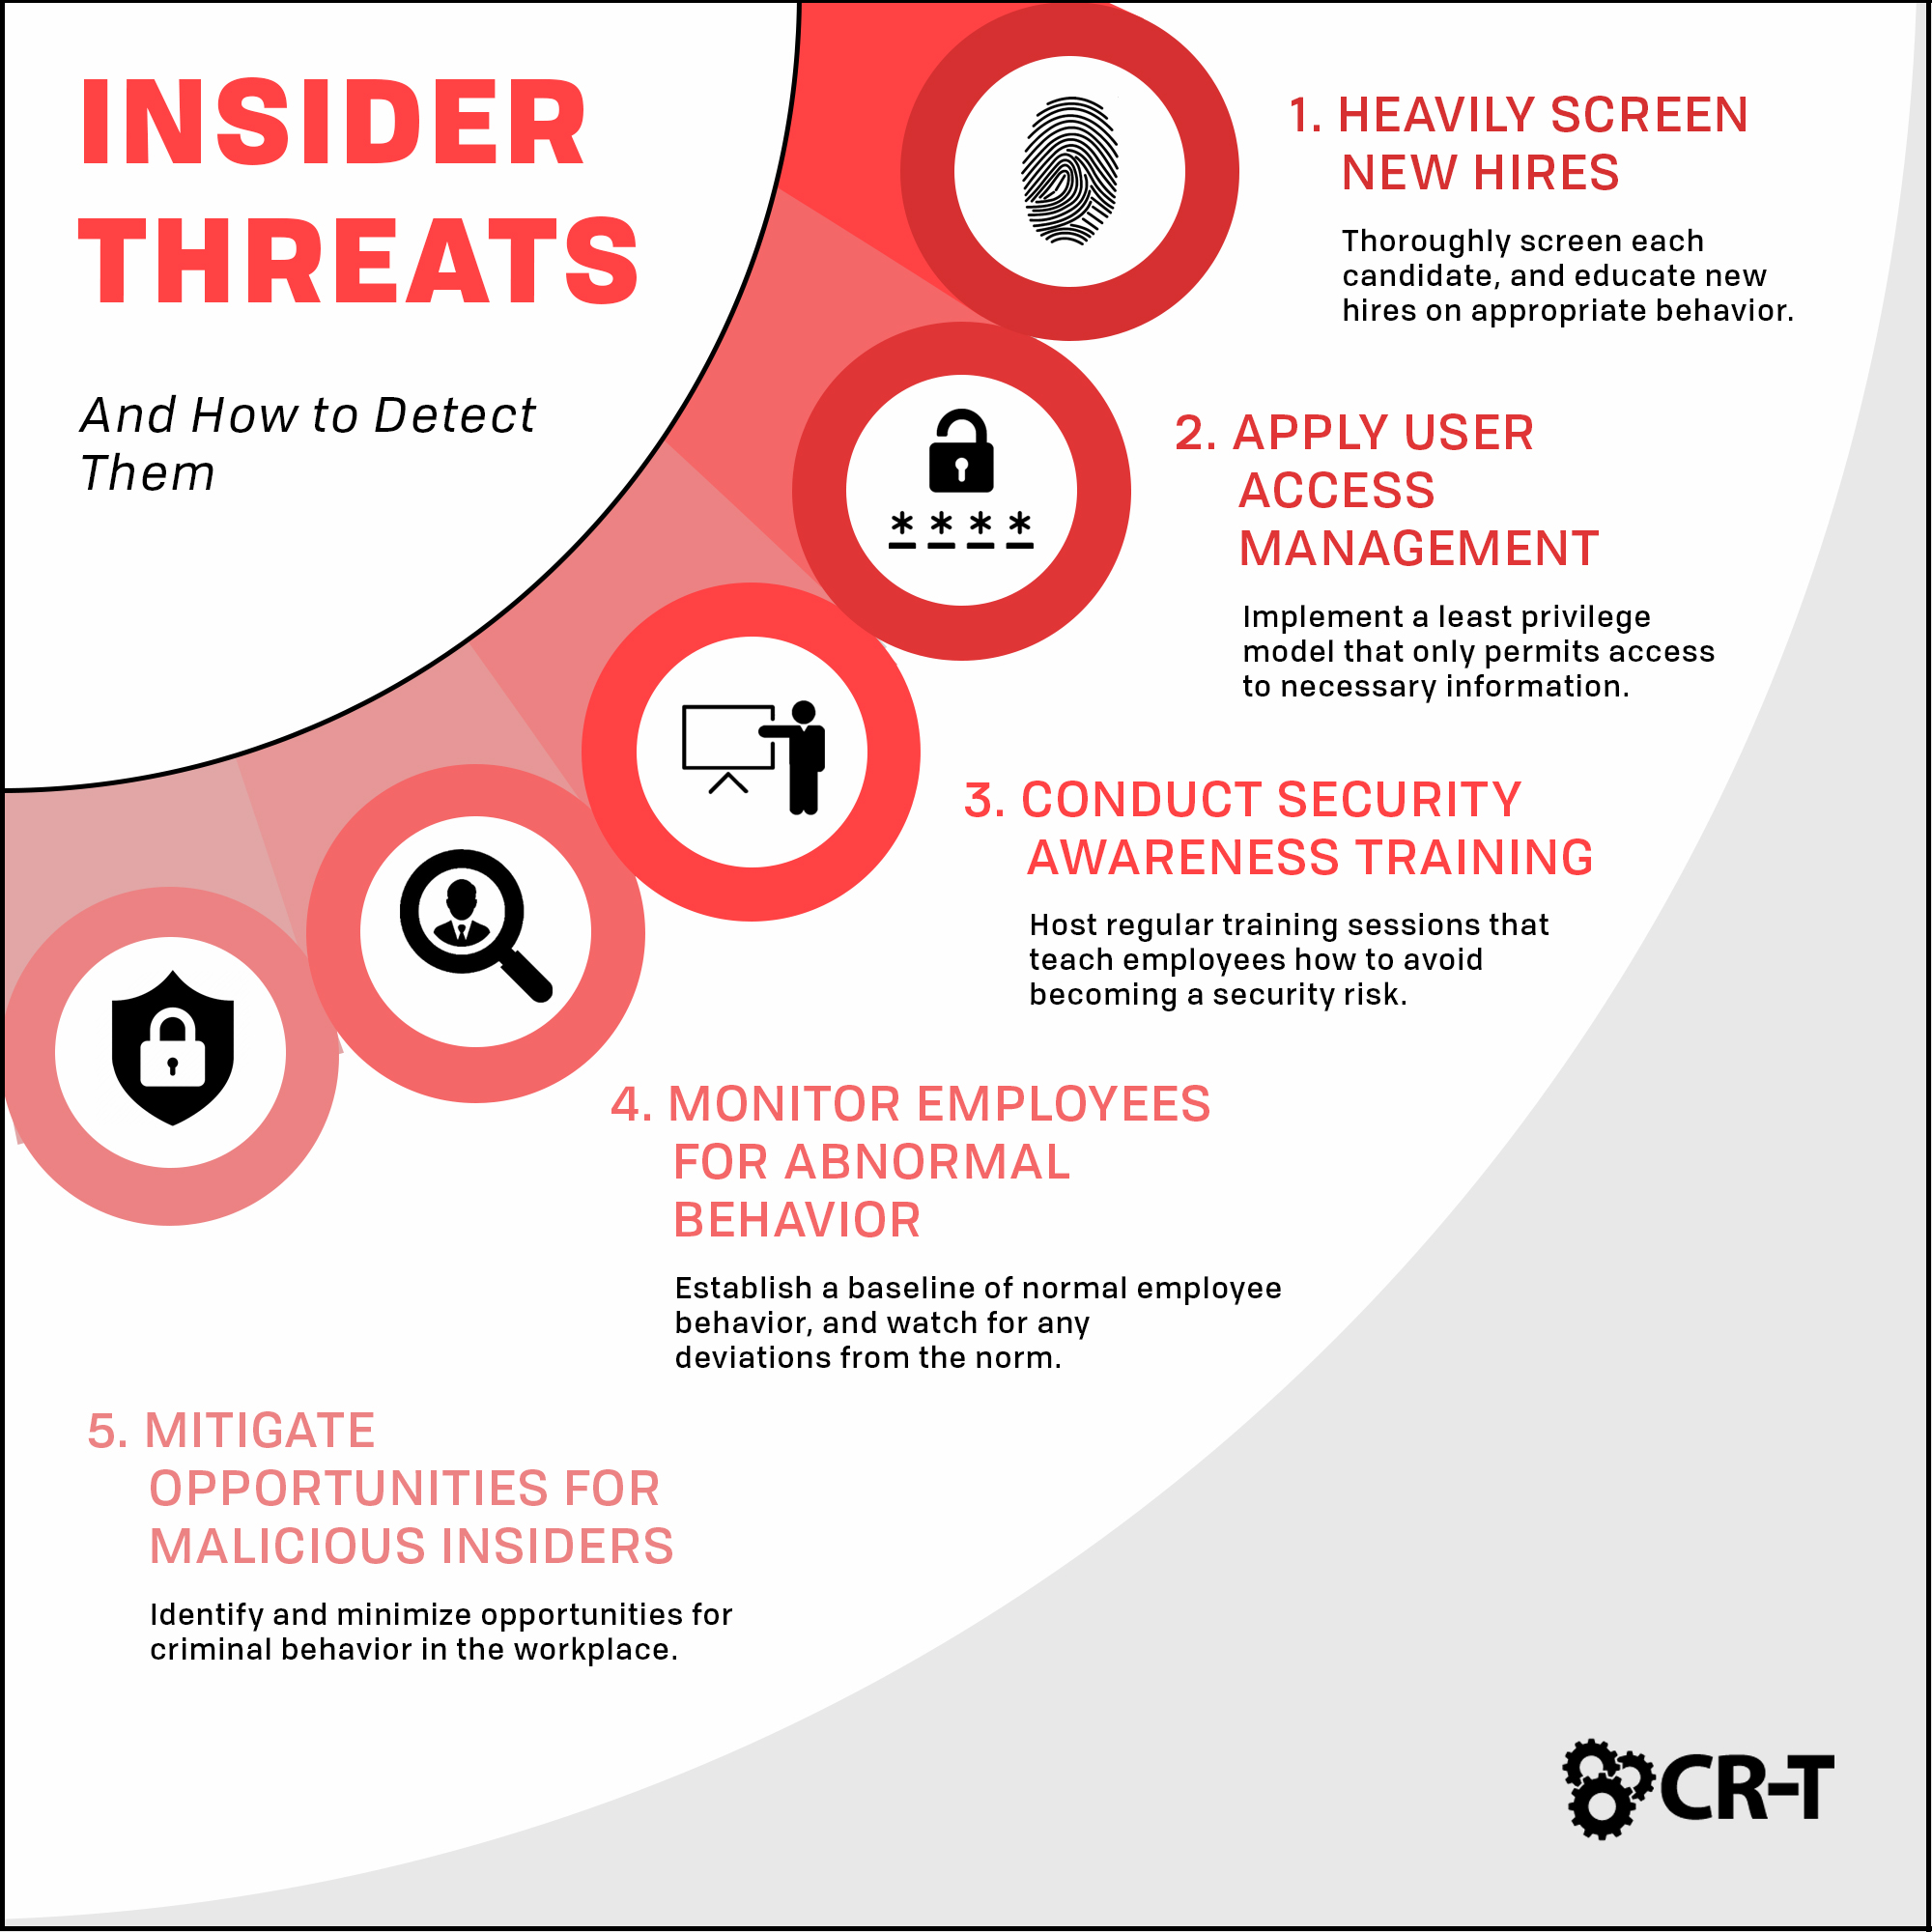 Insider Threats and How to Detect Them | IT Services | CR-T | Utah